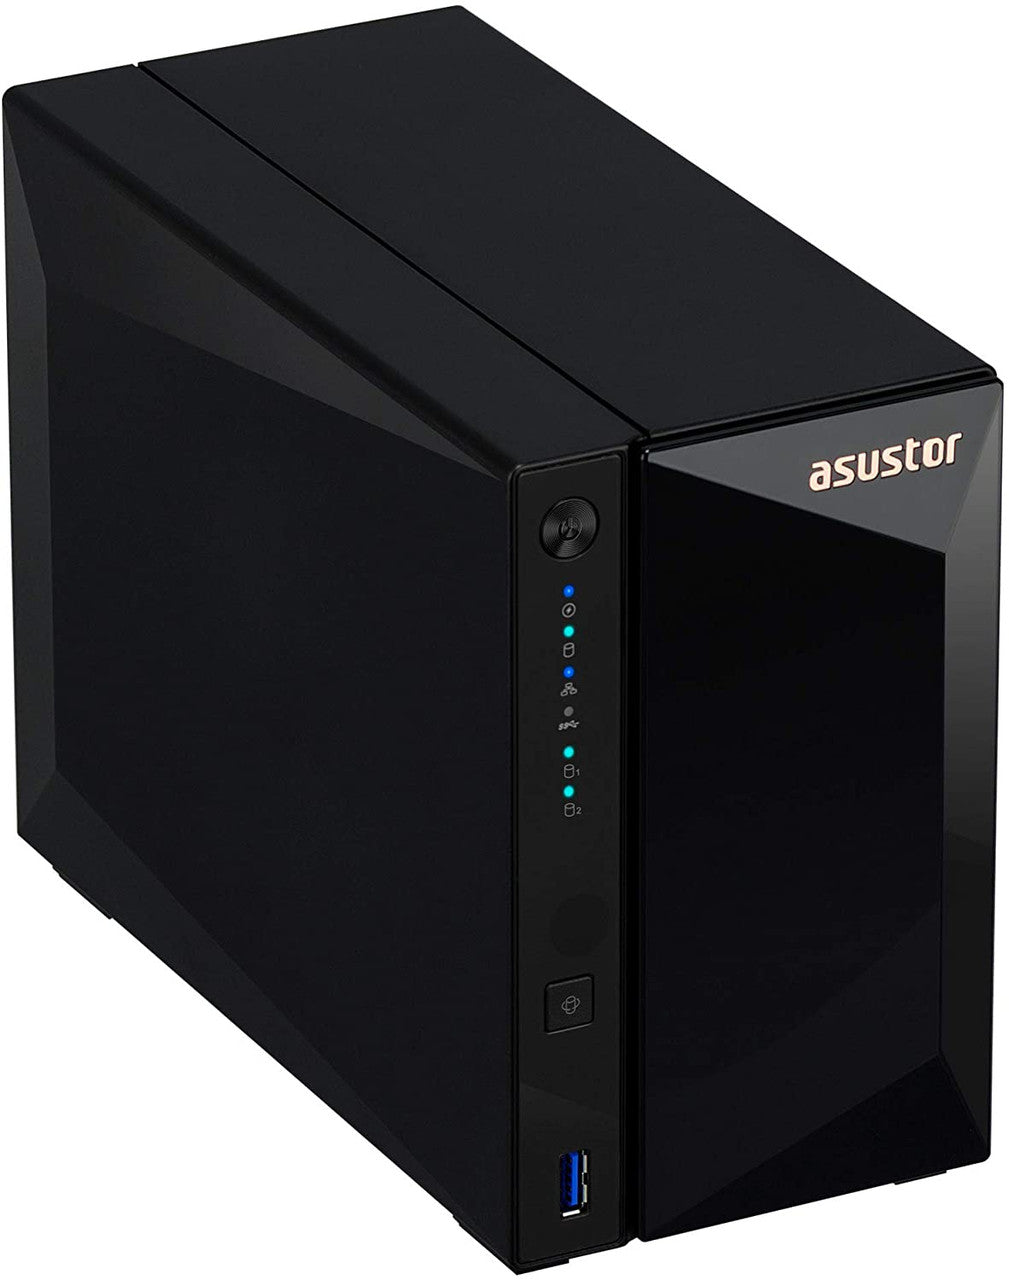 Asustor AS3302T 2-Bay Drivestor 2 PRO NAS with 2GB RAM and 16TB (2x8TB) Western Digital RED Plus Drives Fully Assembled and Tested